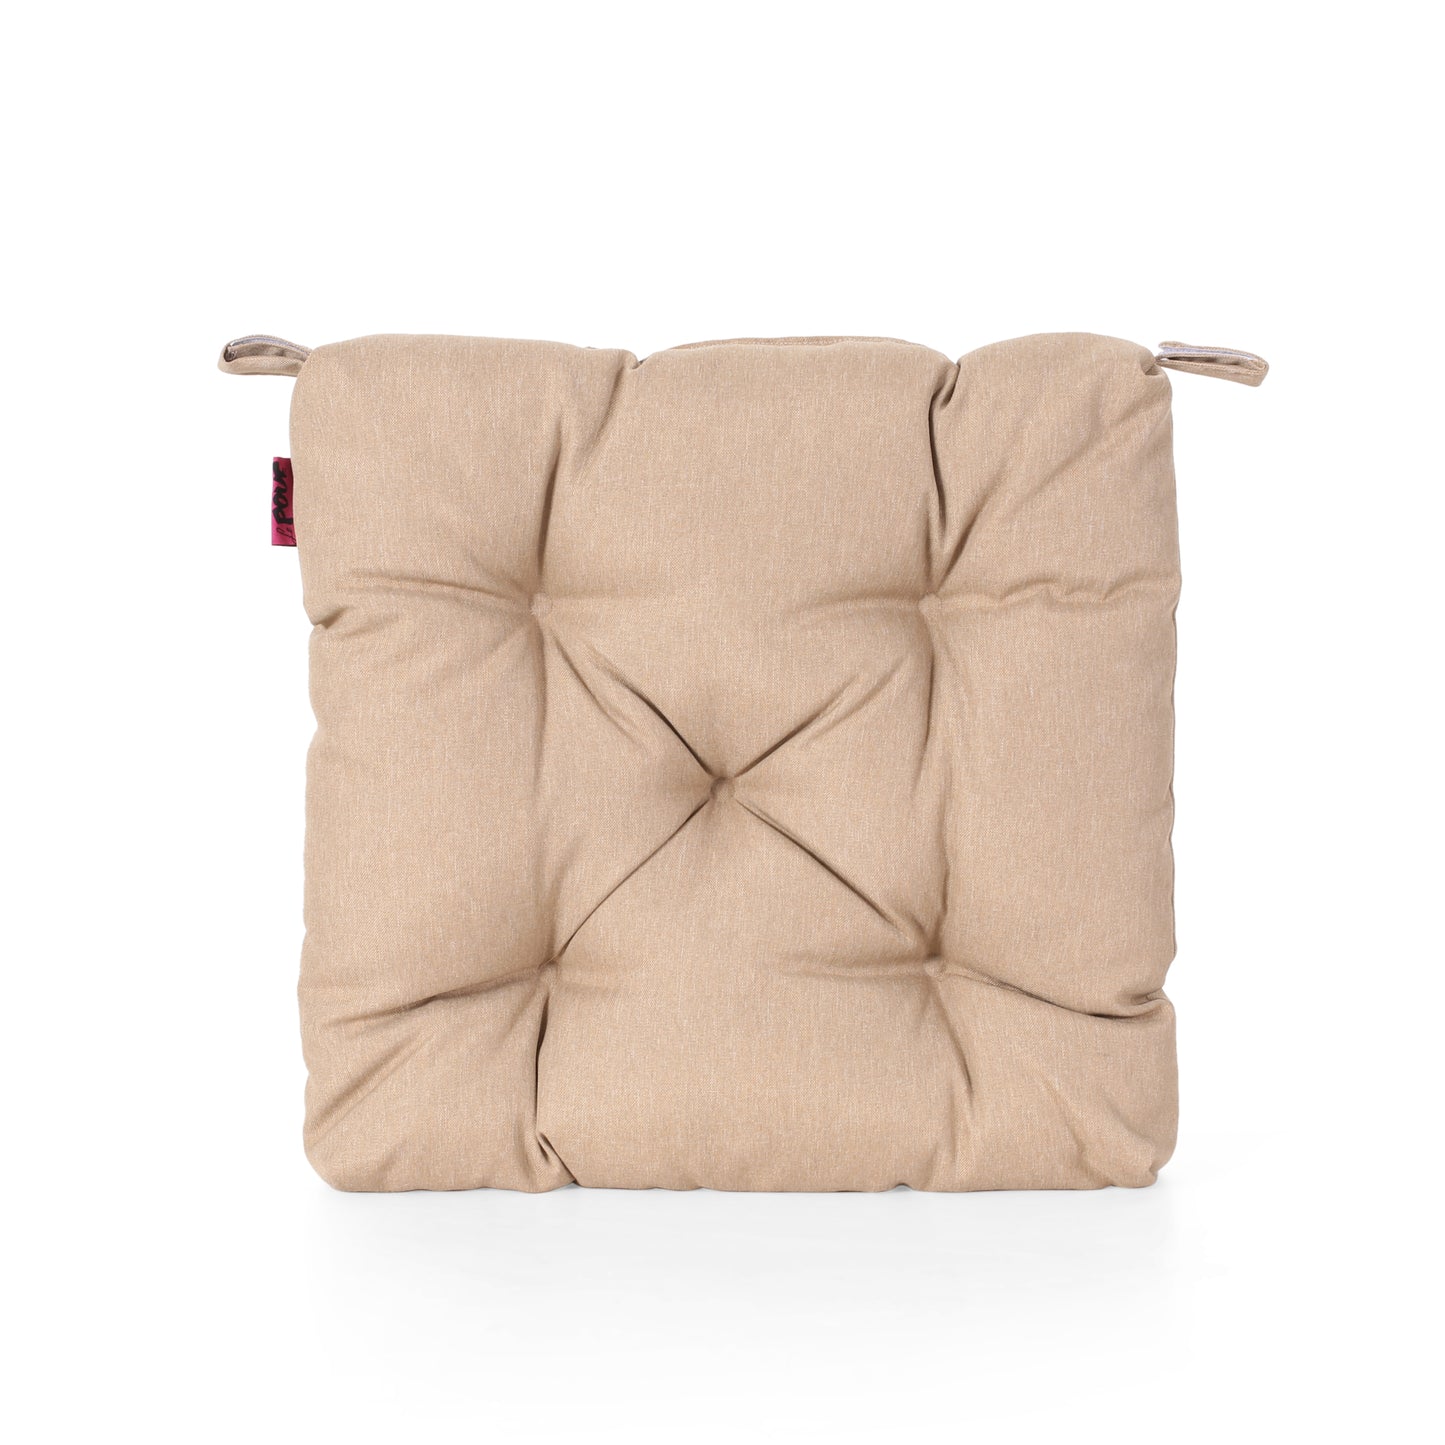 Selina Outdoor Fabric Classic Tufted Chair Cushion